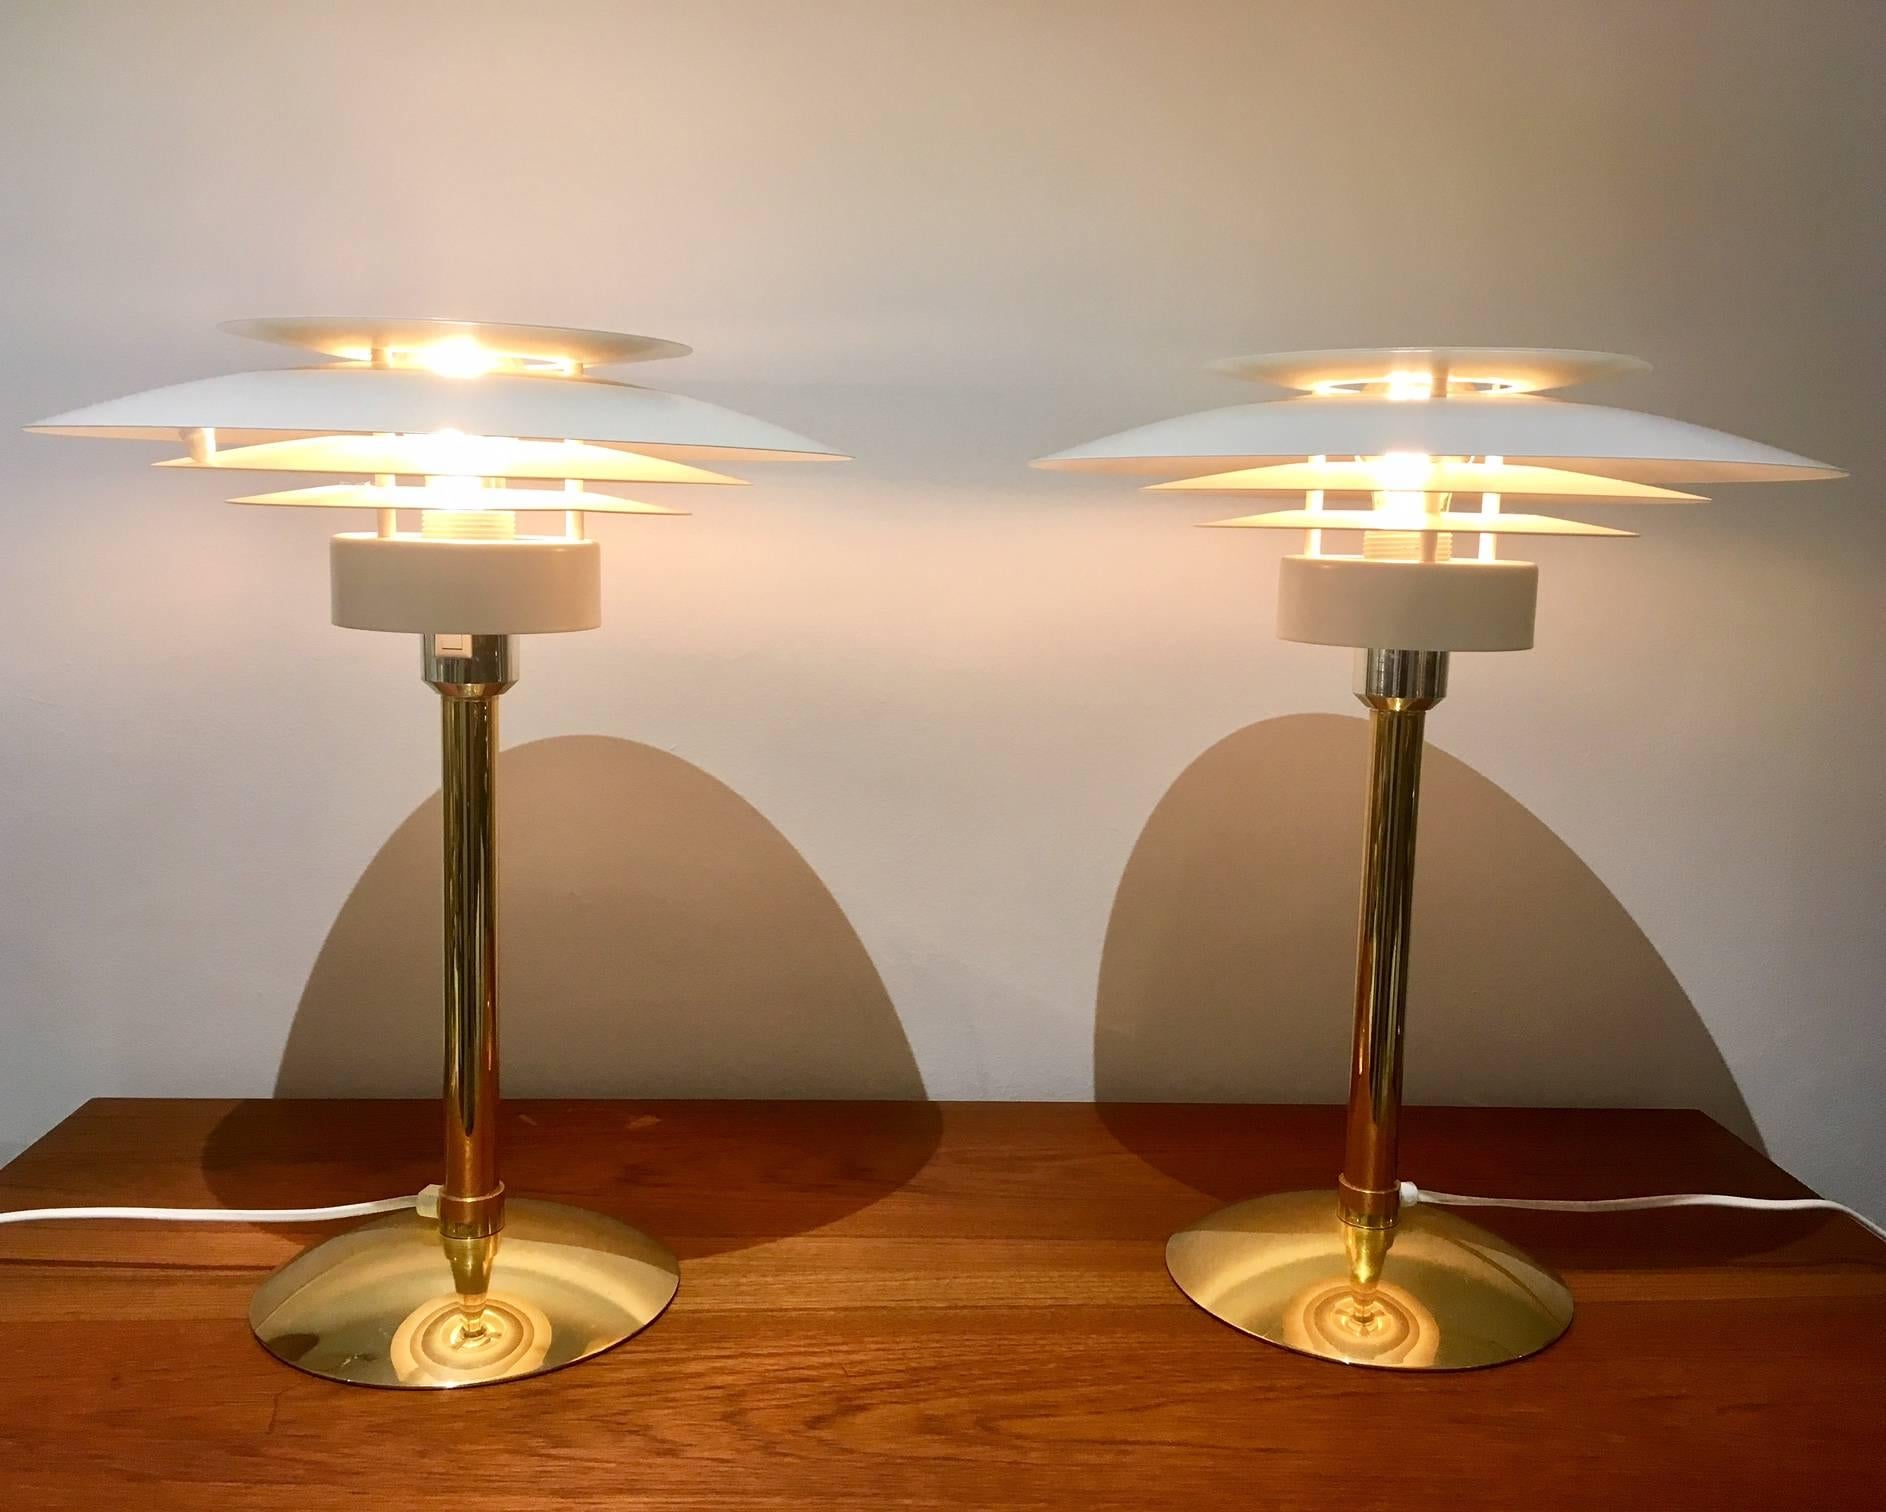 Two table lamps, model 2687, manufactured by Light Studio by Horn. Brass and chrome-plated metal, shades of white painted metal.